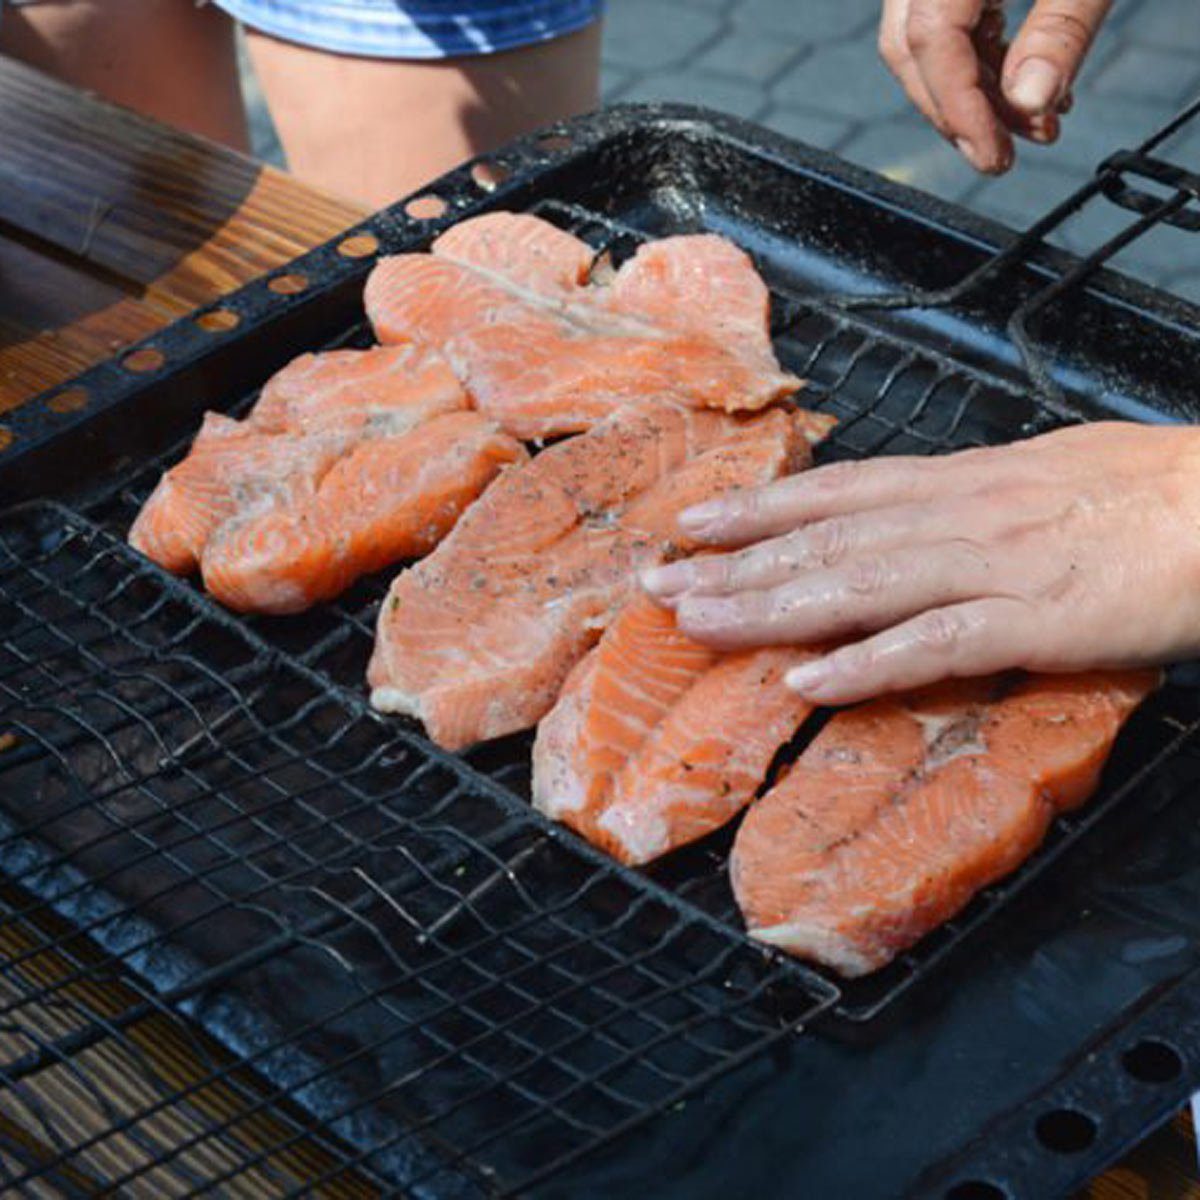 Grilling fish steaks